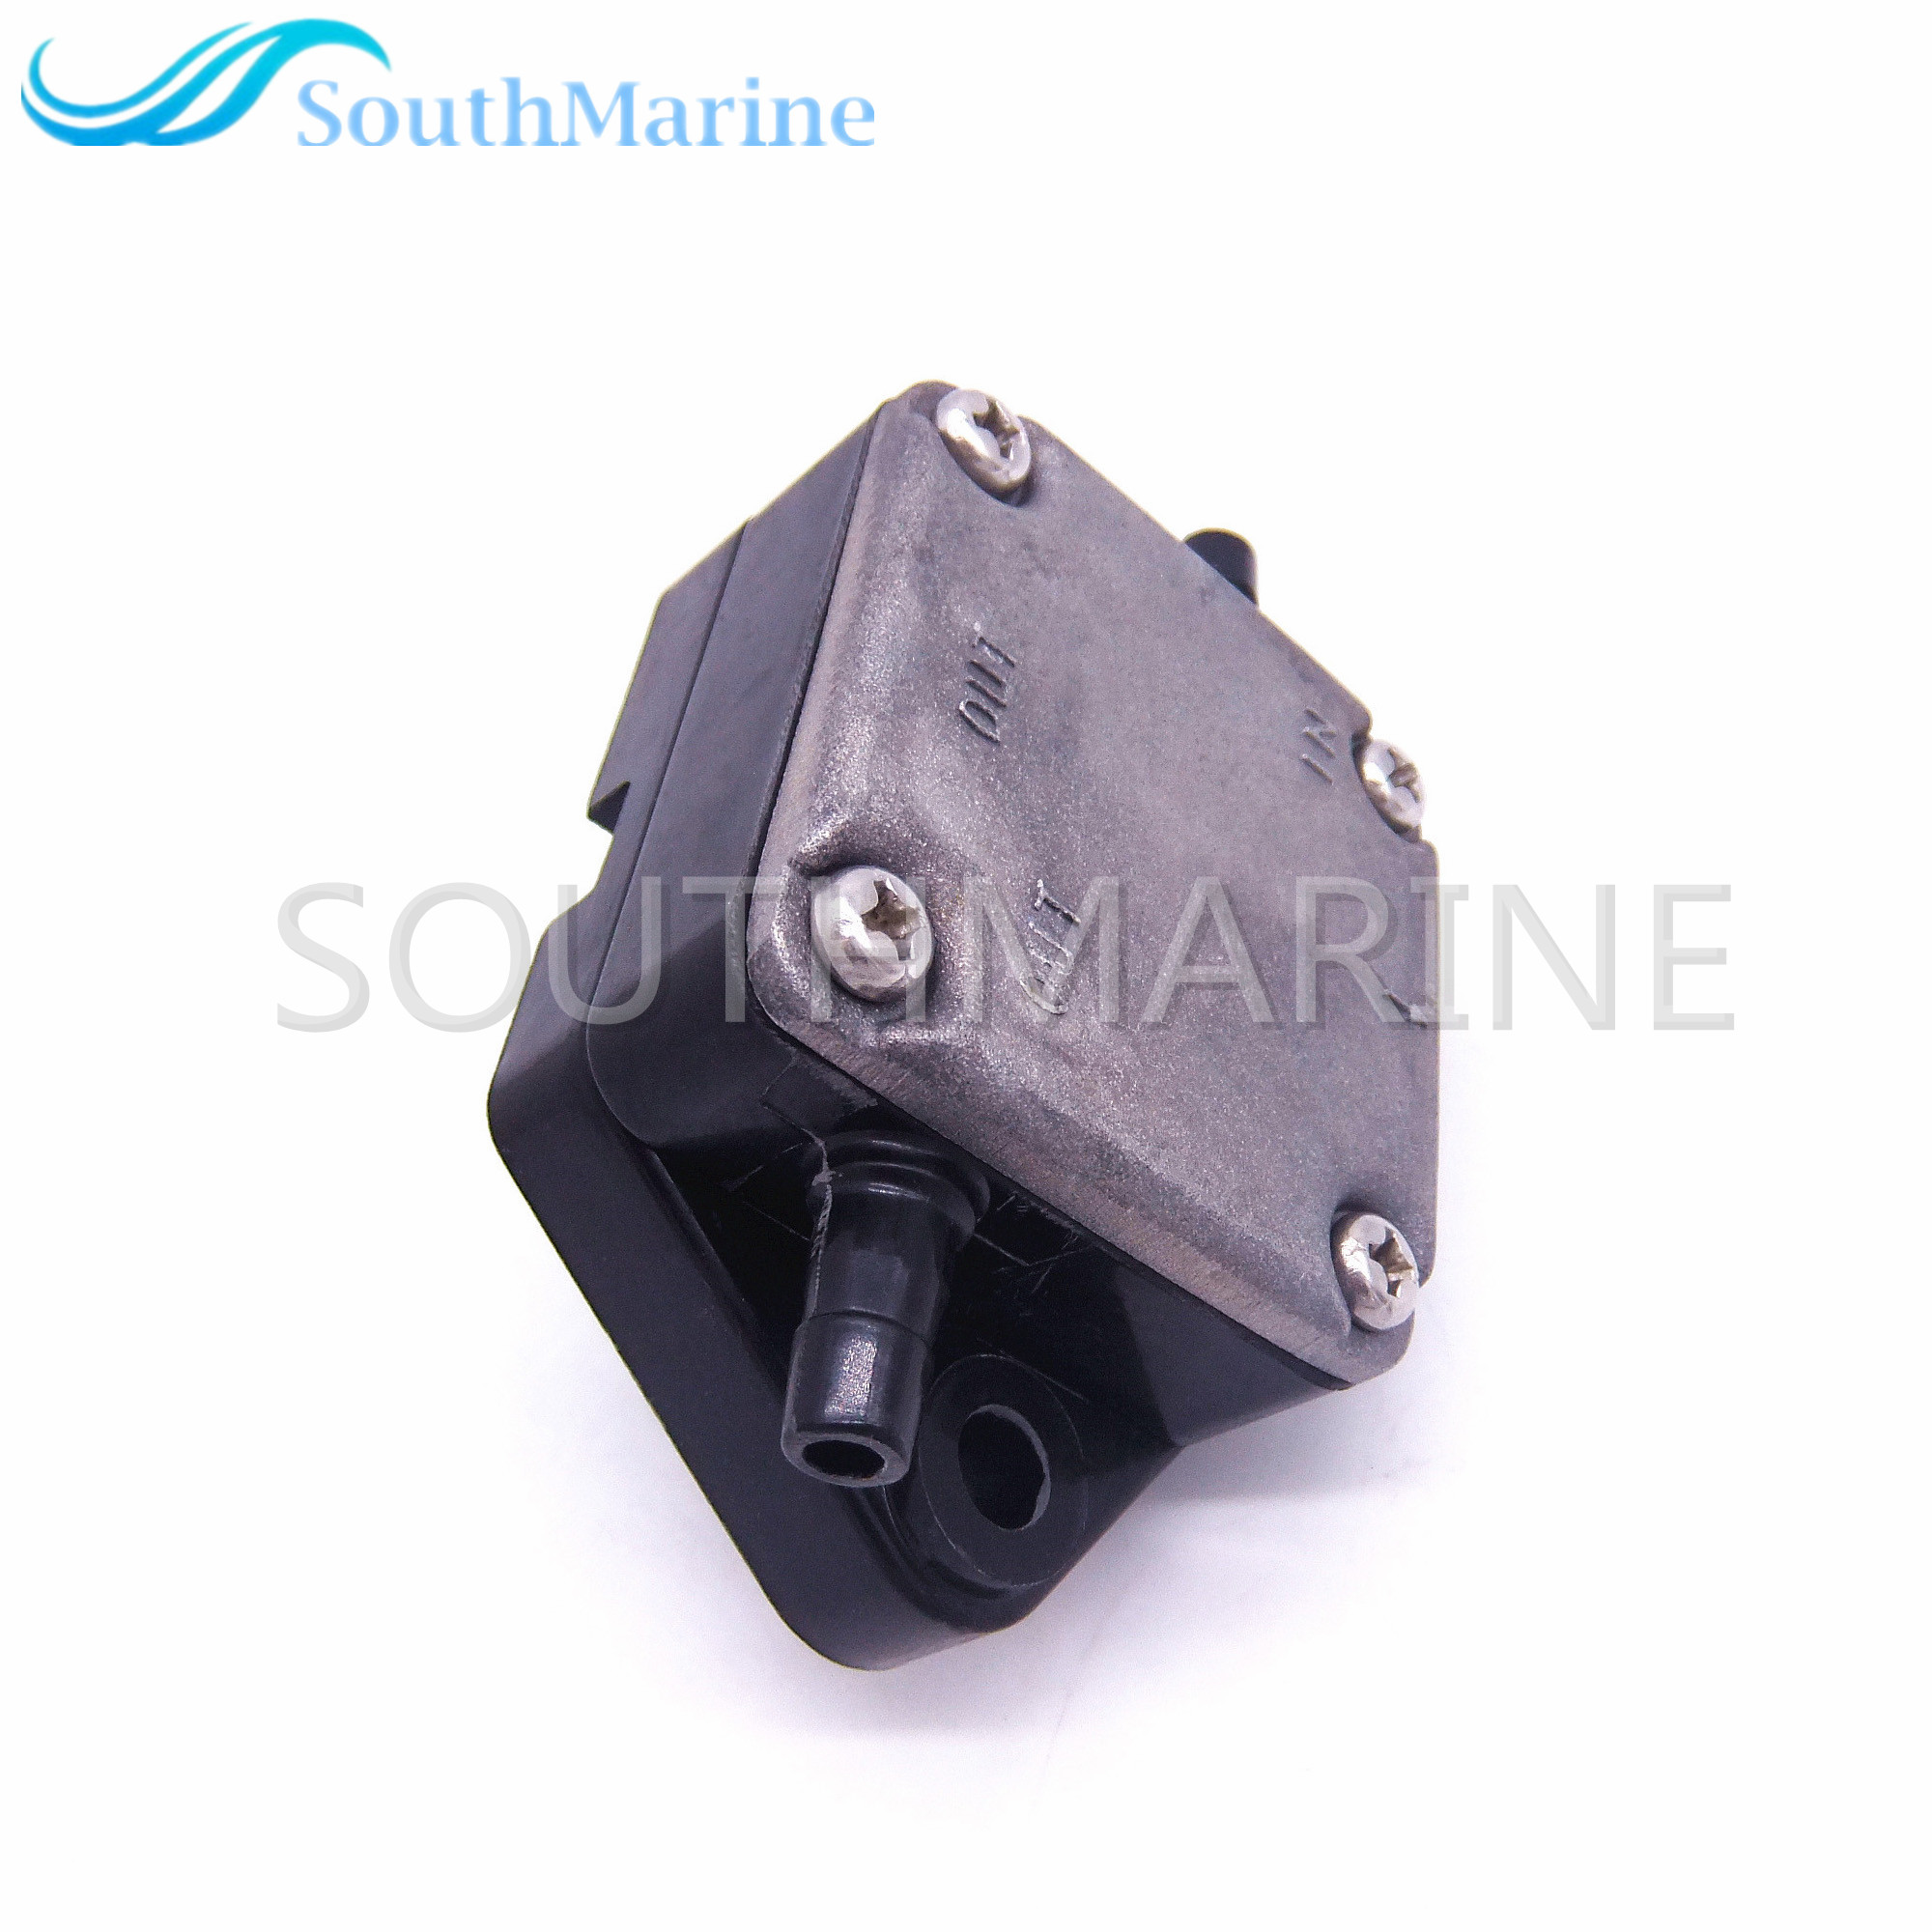 F8-05070000 Fuel Pump Assy for Parsun HDX 4-stroke F8 F9.8 Outboard Motors ,Free Shipping